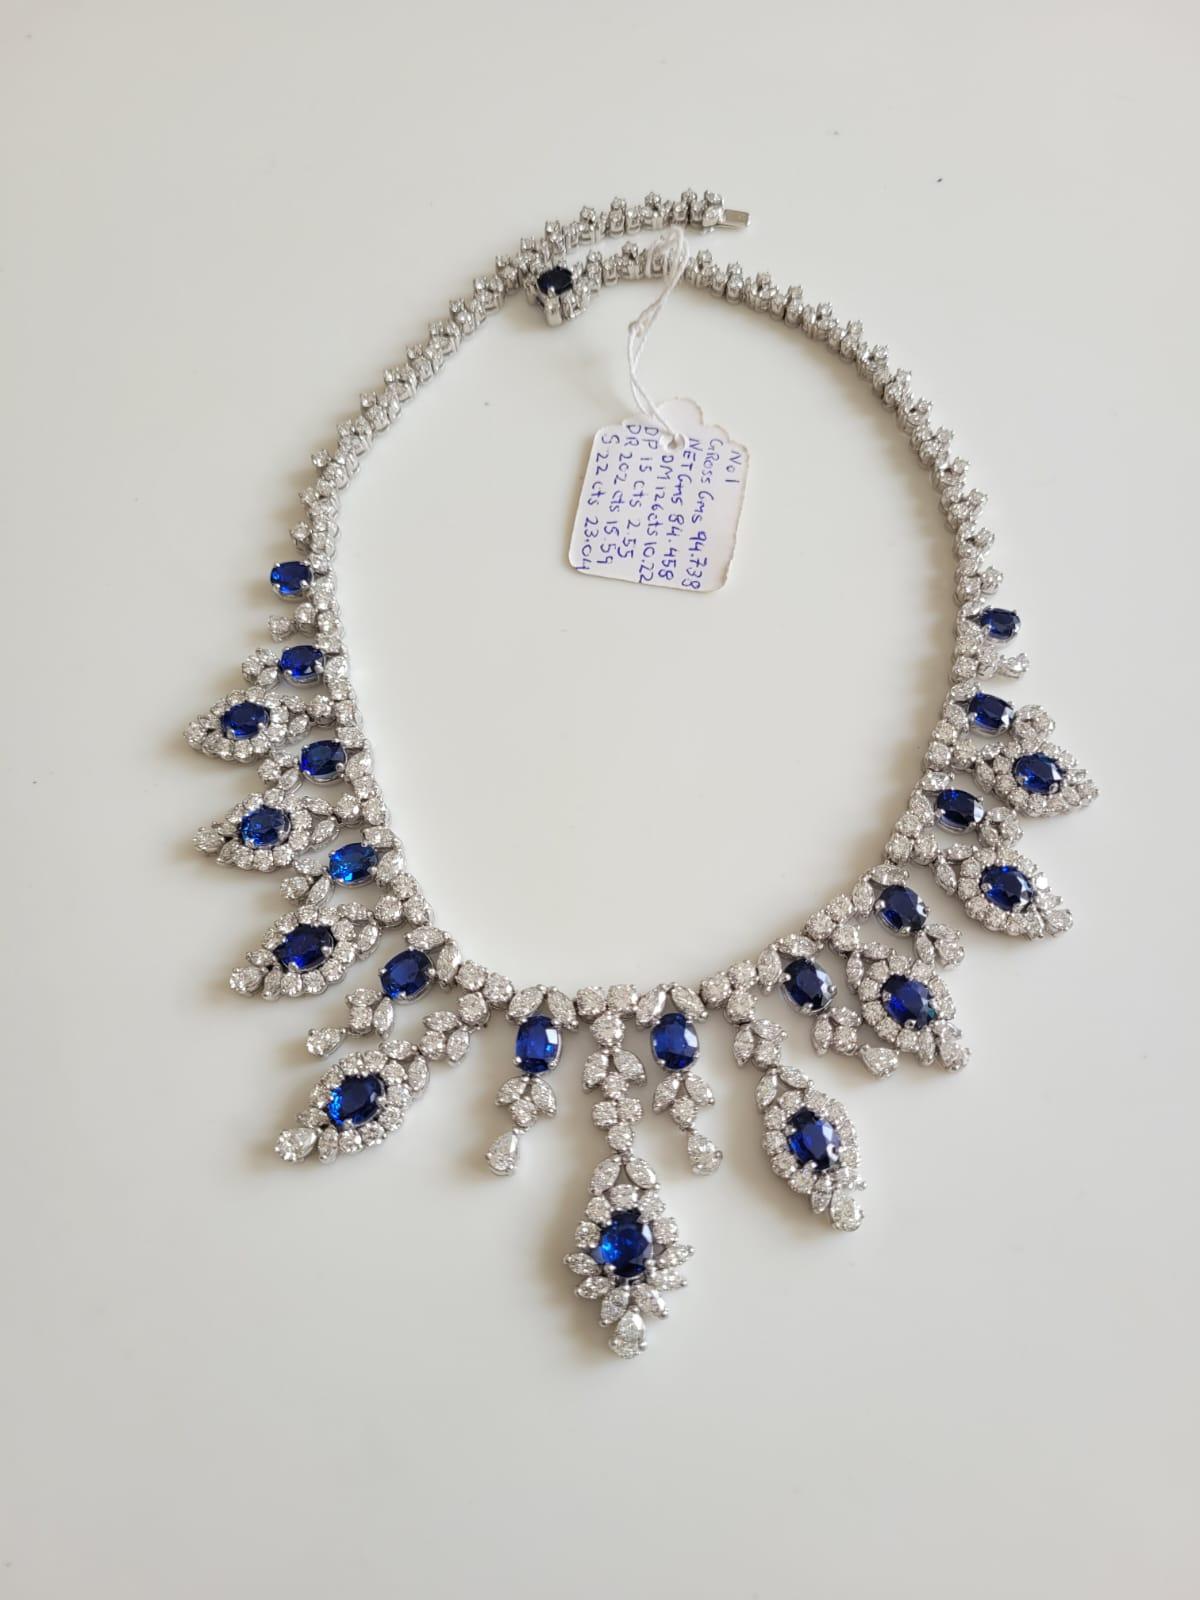 $250, 000 Rare Fancy 18KT Gold Estate Gorgeous Ceylon Sapphire Diamond Necklace In New Condition For Sale In New York, NY